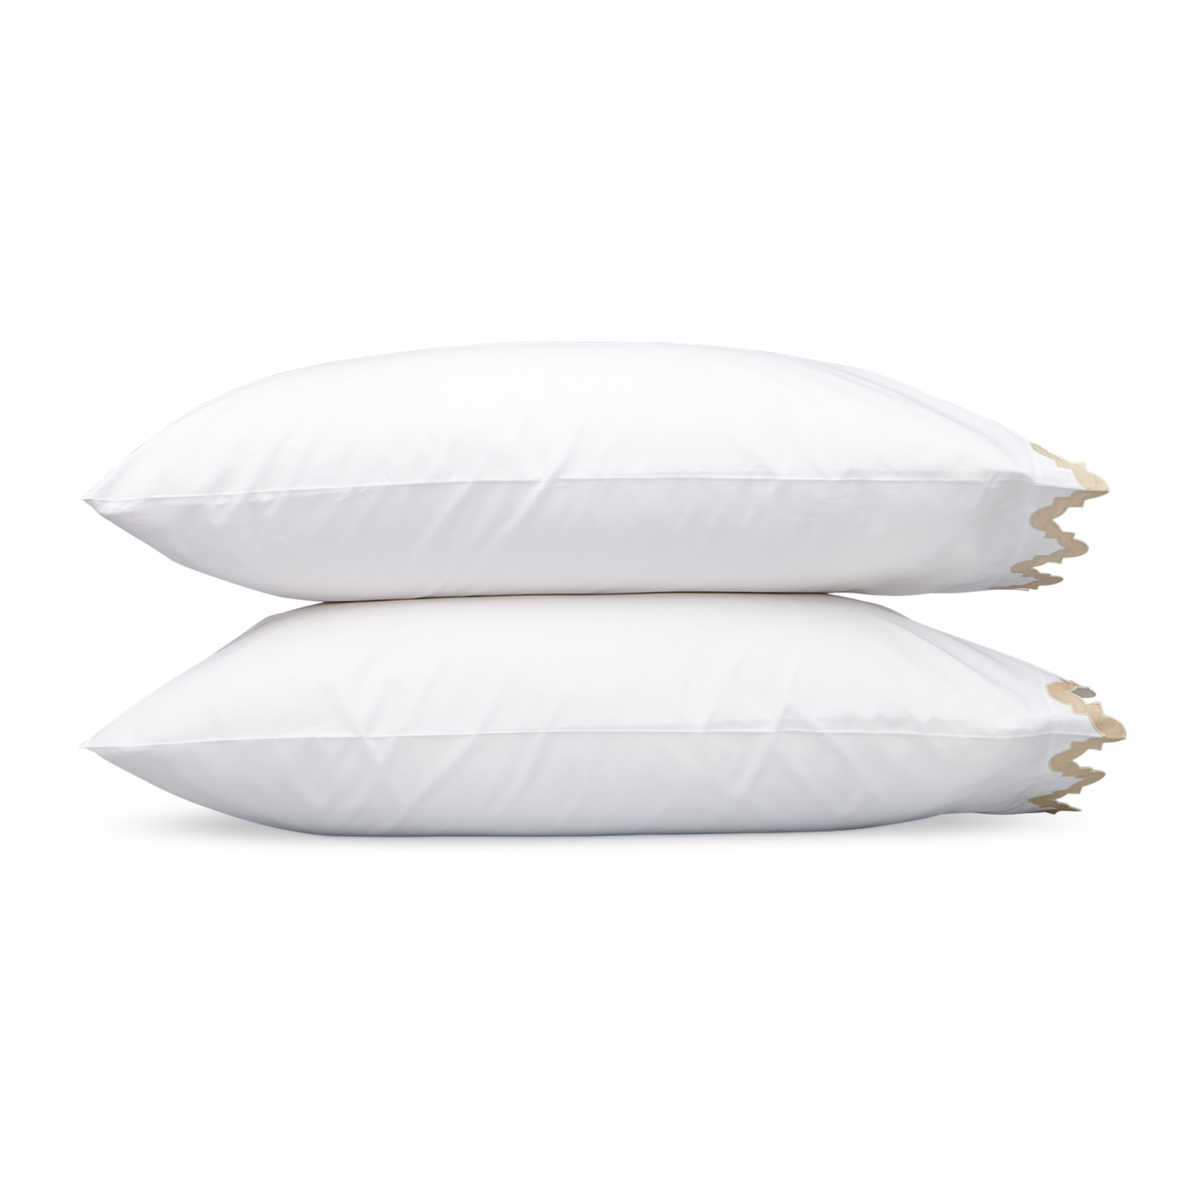 Pair of Pillowcases of Matouk Aziza Bedding in Champagne Color